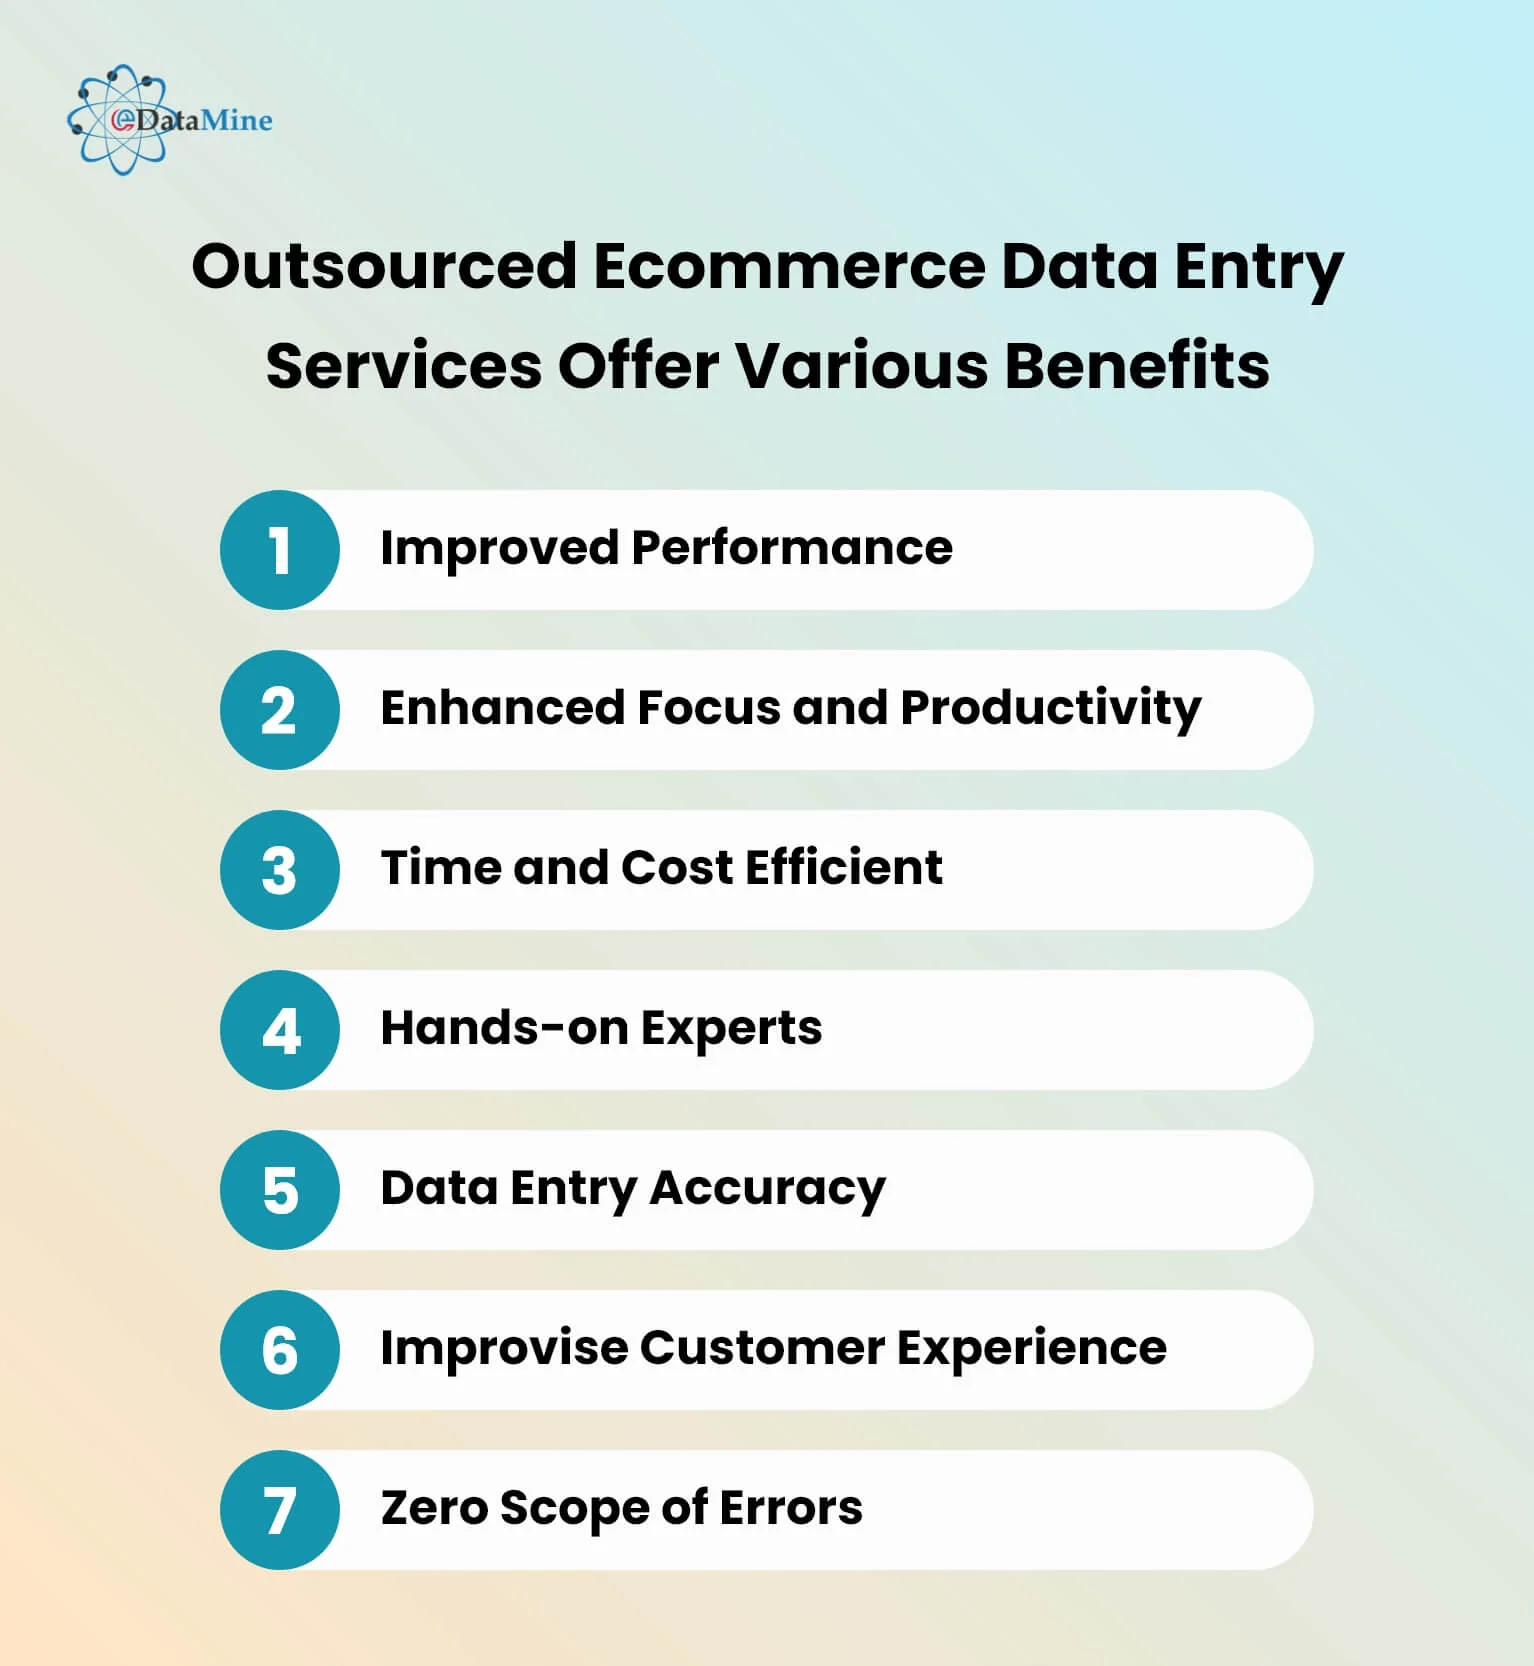 Outsourced Ecommerce Data Entry Services Offer Various Benefits